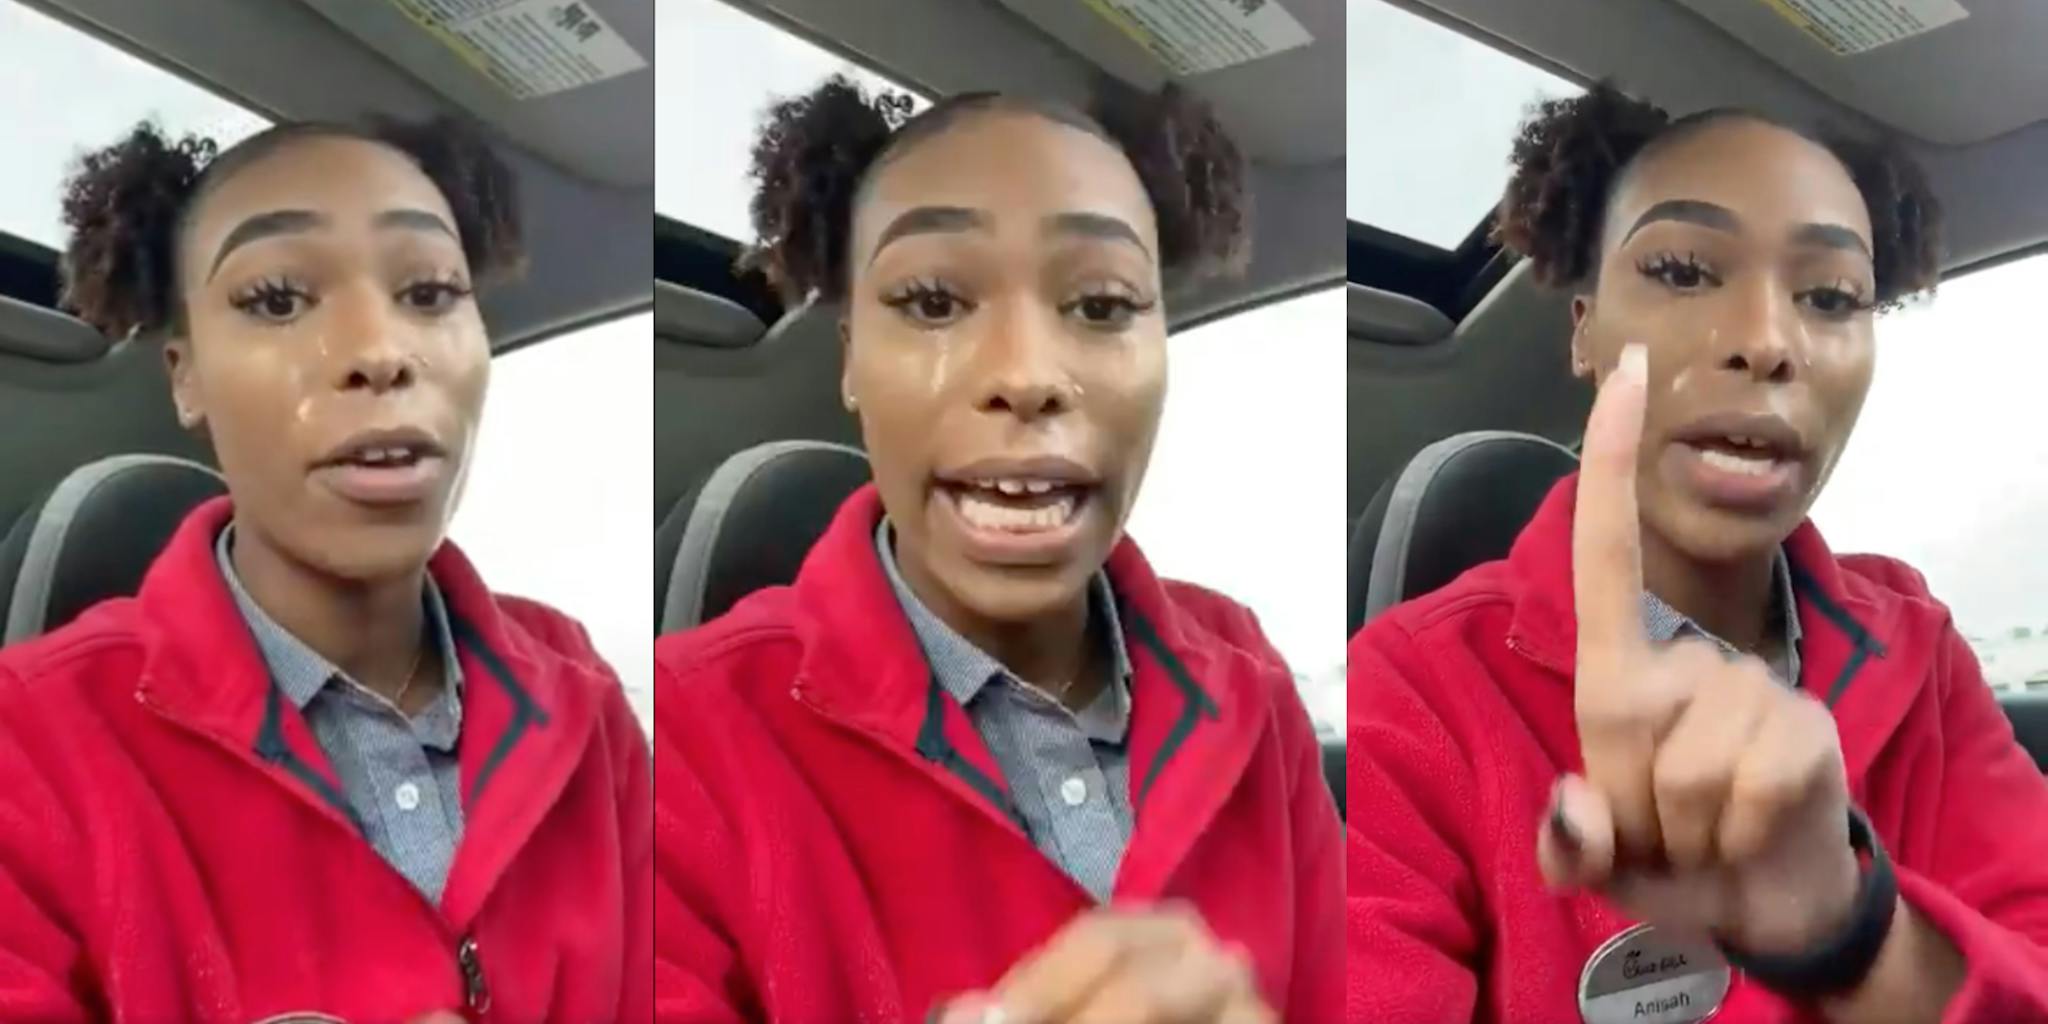 ‘He just tried to fire me’ ChickfilA reviewbombed after Black